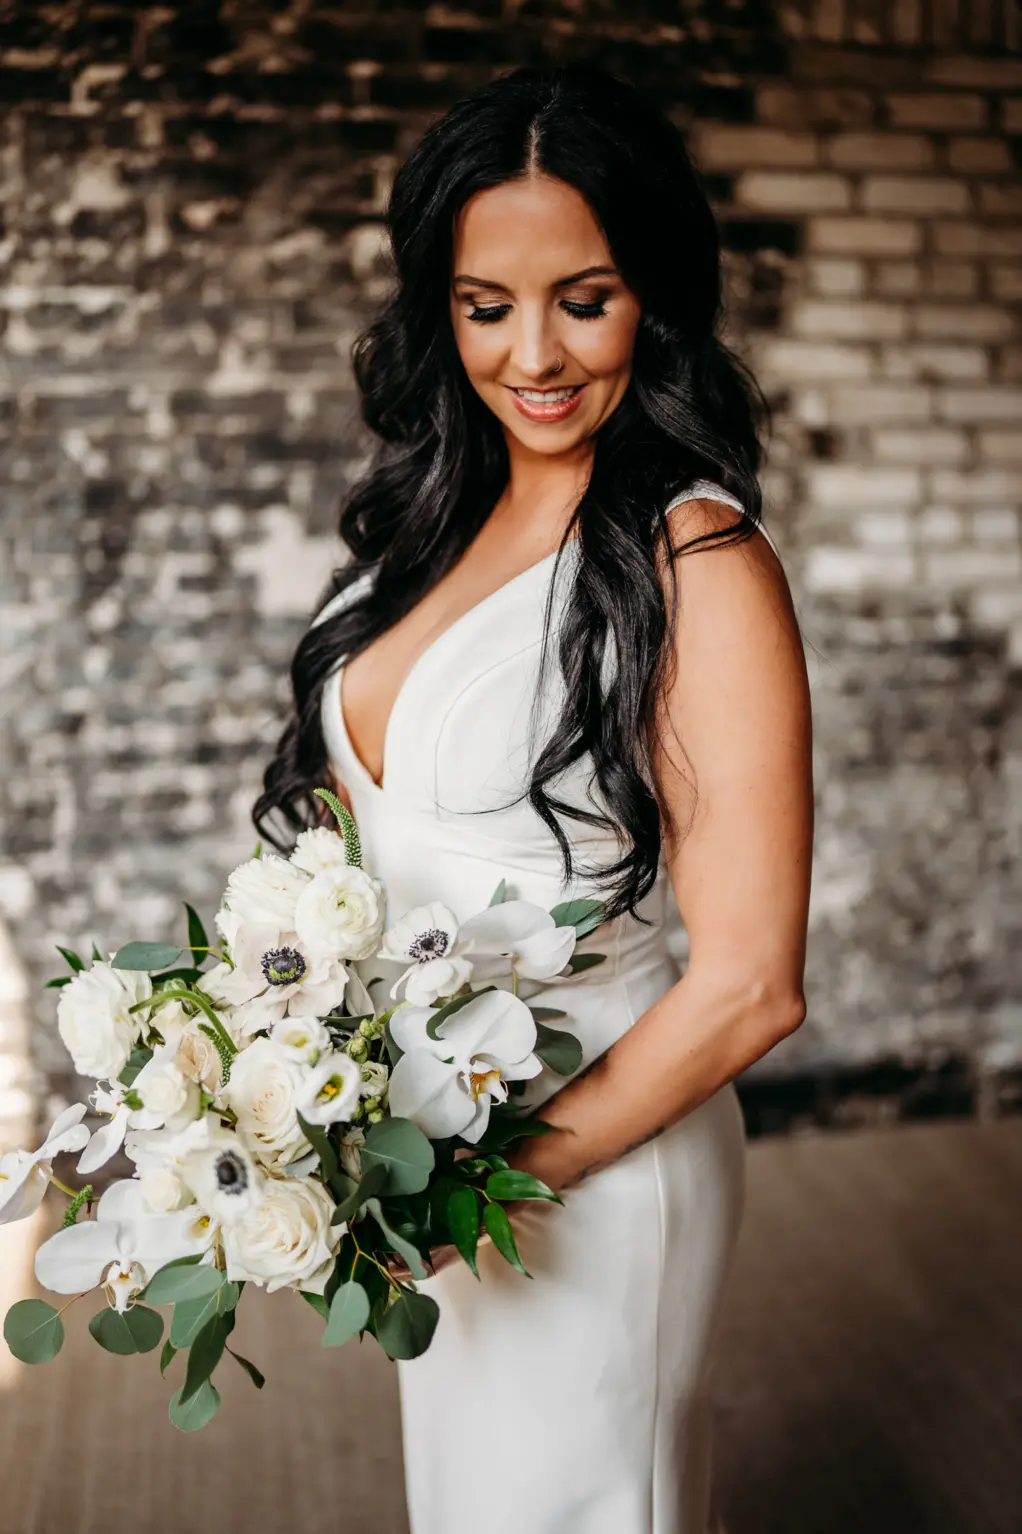 Classic Long Wedding Hair and Makeup Inspiration | White Roses, Anemone, Orchids, and Greenery Bouquet Ideas | Tampa Bay HMUA Femme Akoi Beauty Studio | Photographer Videographer Sabrina Autumn Photography